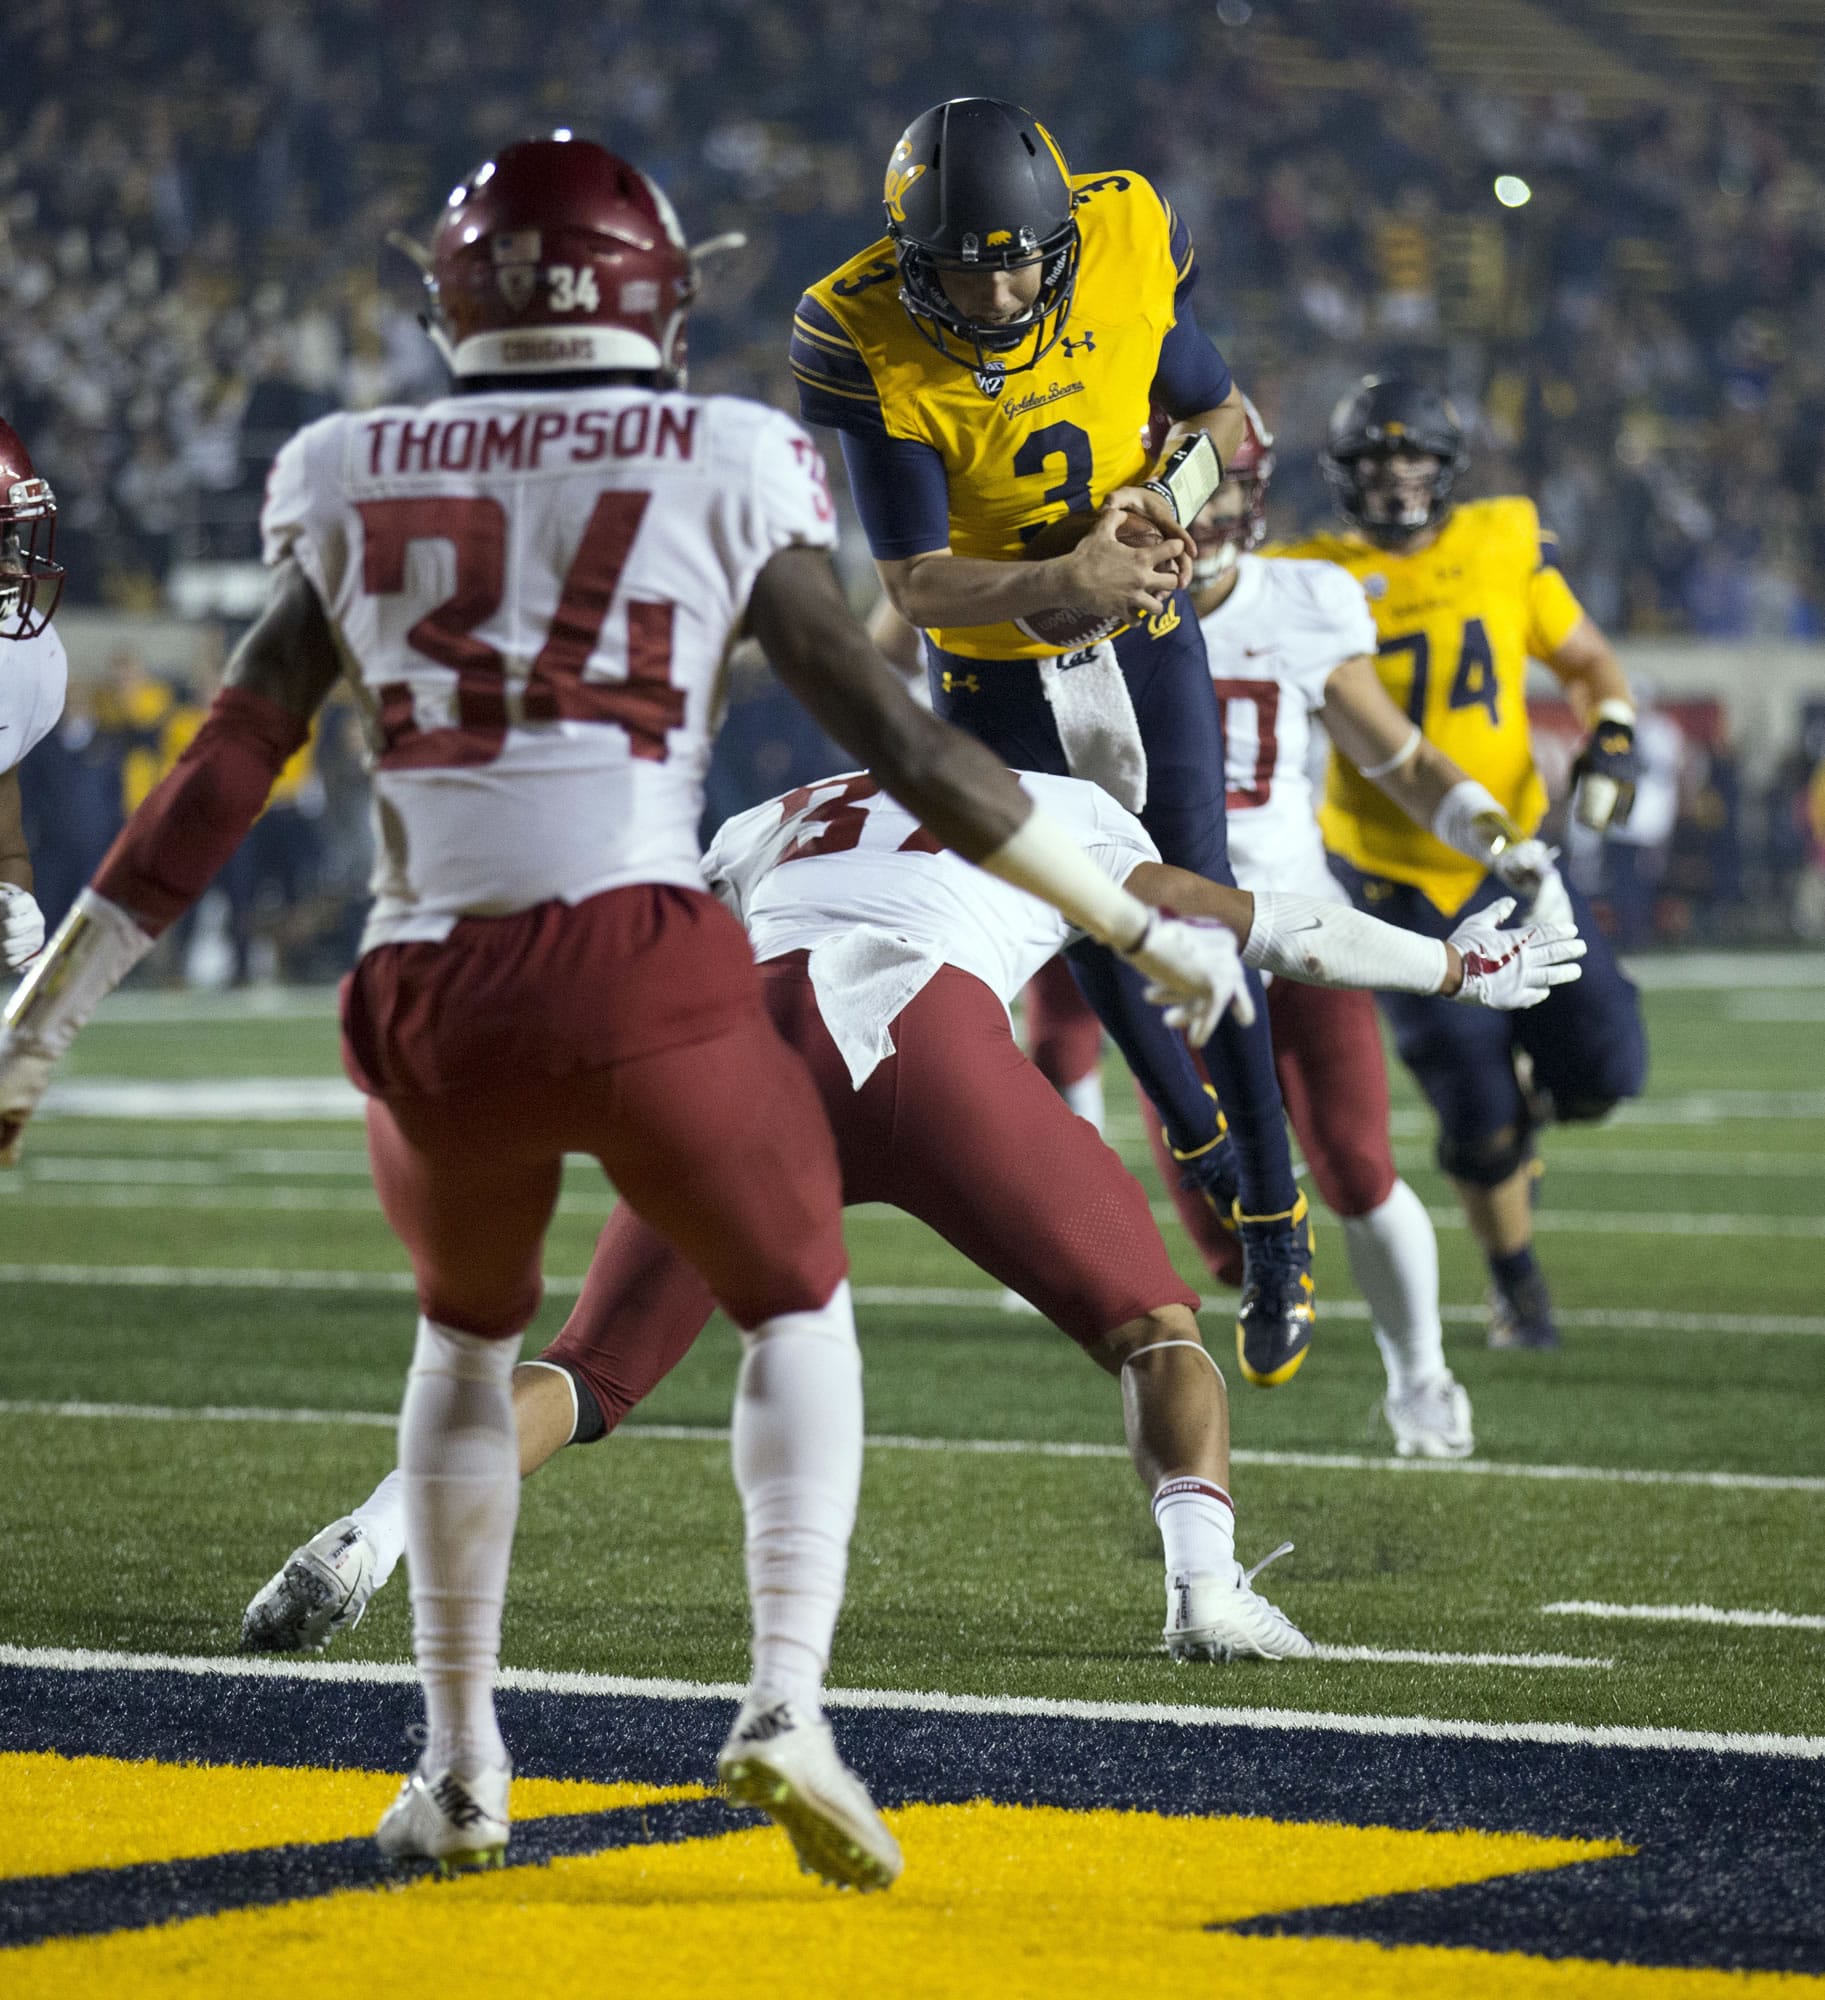 California's Ross Bowers (3) vaults into the end zone for a touchdown against Washington State during the fourth quarter of an NCAA college football game, Friday, Oct. 13, 2017, in Berkeley, Calif. The Golden Bears upset the eight-ranked Cougars, 37-3. (AP Photo/D.